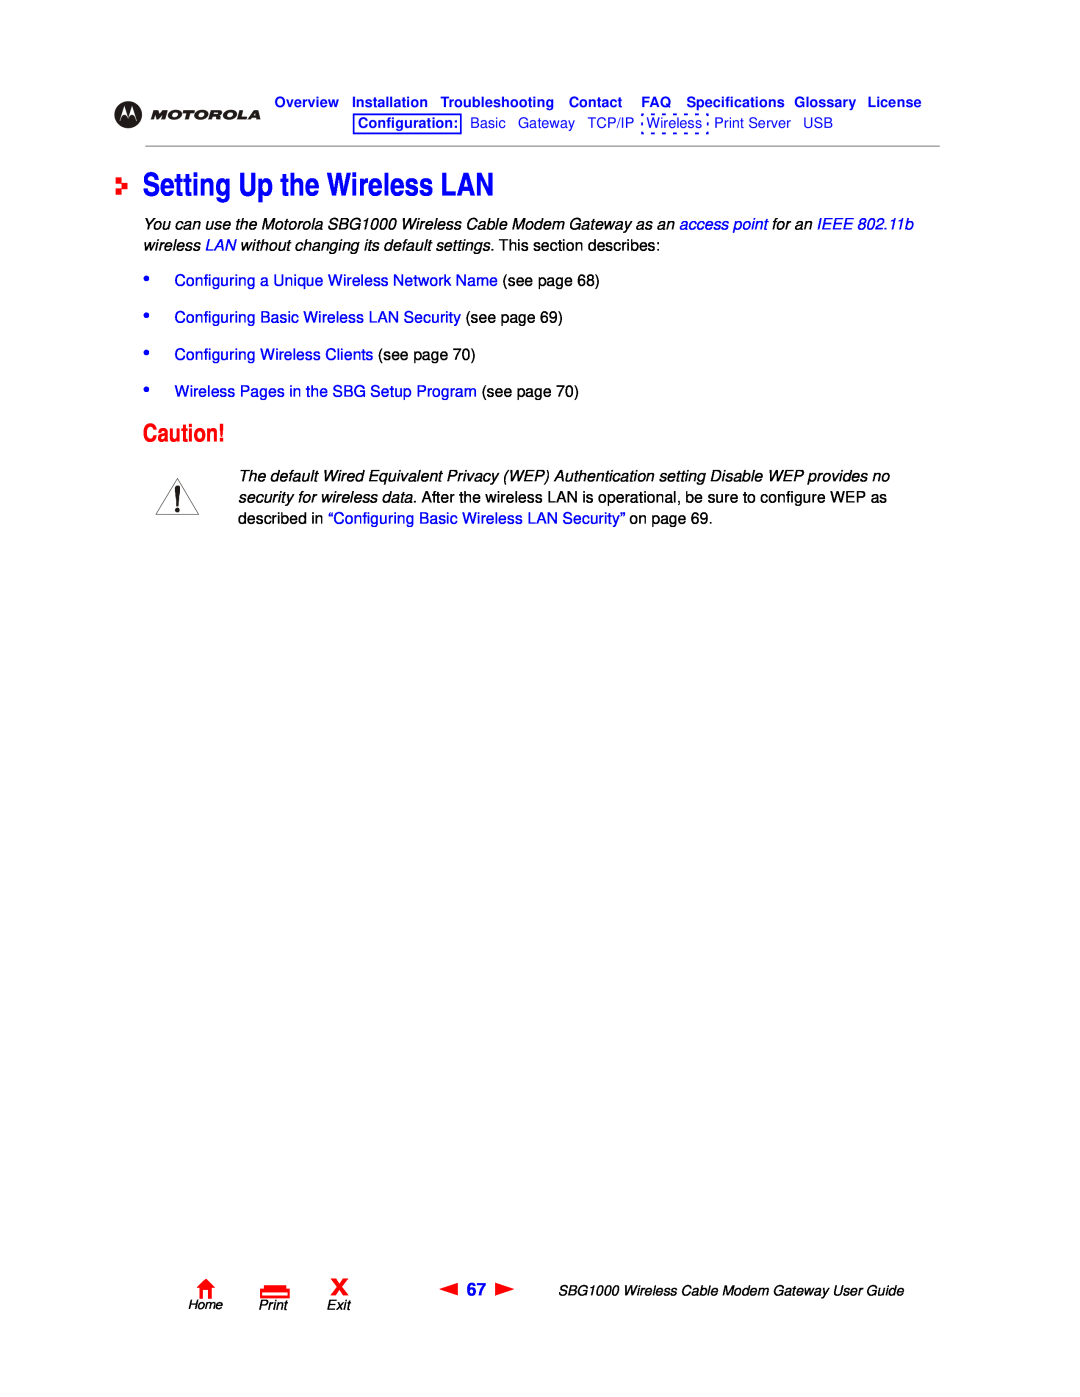 Motorola SBG1000 manual Setting Up the Wireless LAN, Configuring a Unique Wireless Network Name see page 